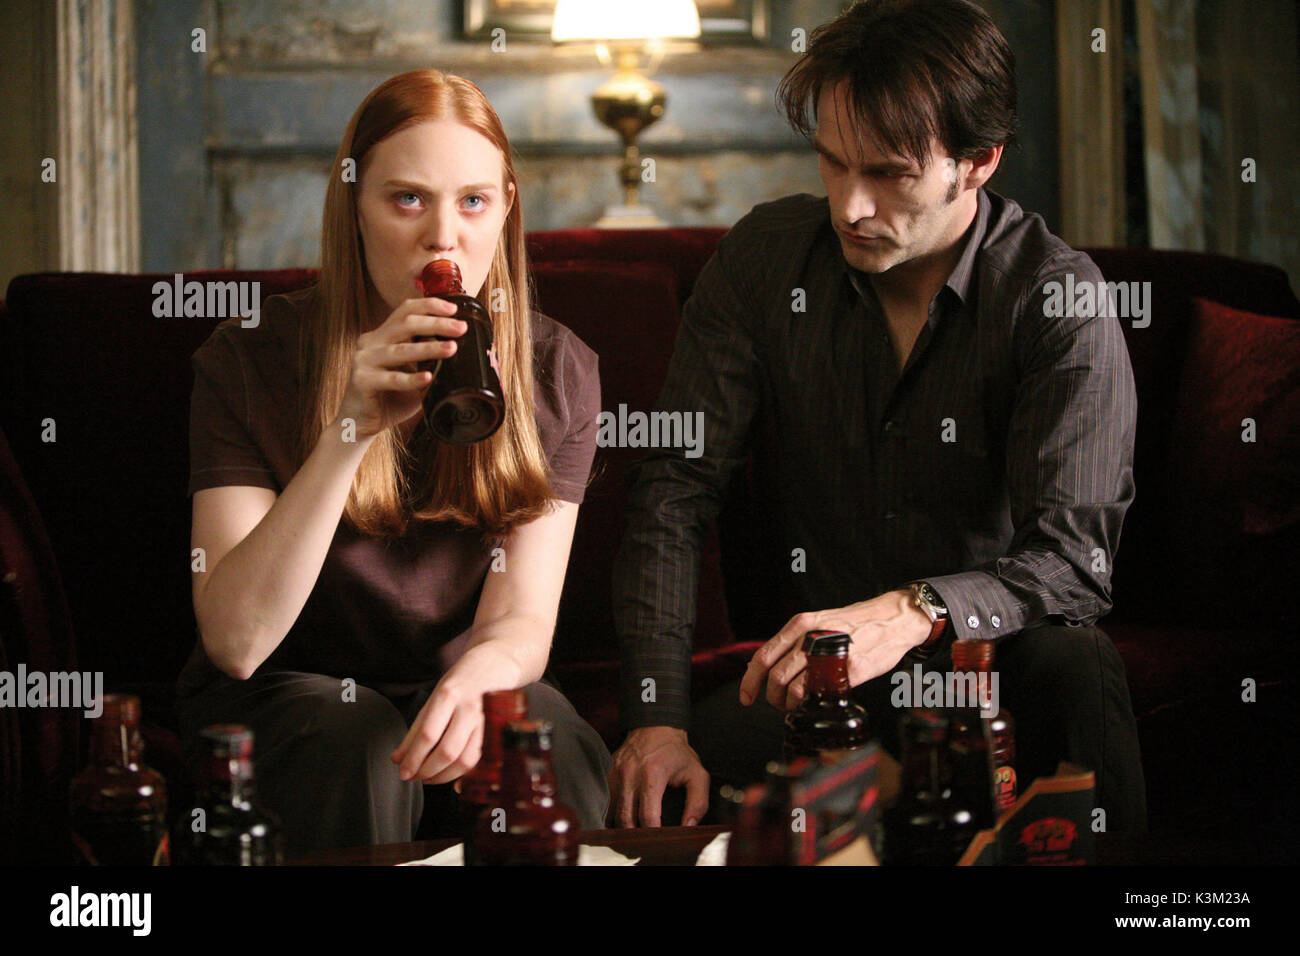 TRUE BLOOD Series,2/Episode,1/ Nothing But The Blood DEBORAH ANN WOLL as Jessica Hamby, STEPHEN MOYER as Bill Compton        Date: 2008 Stock Photo